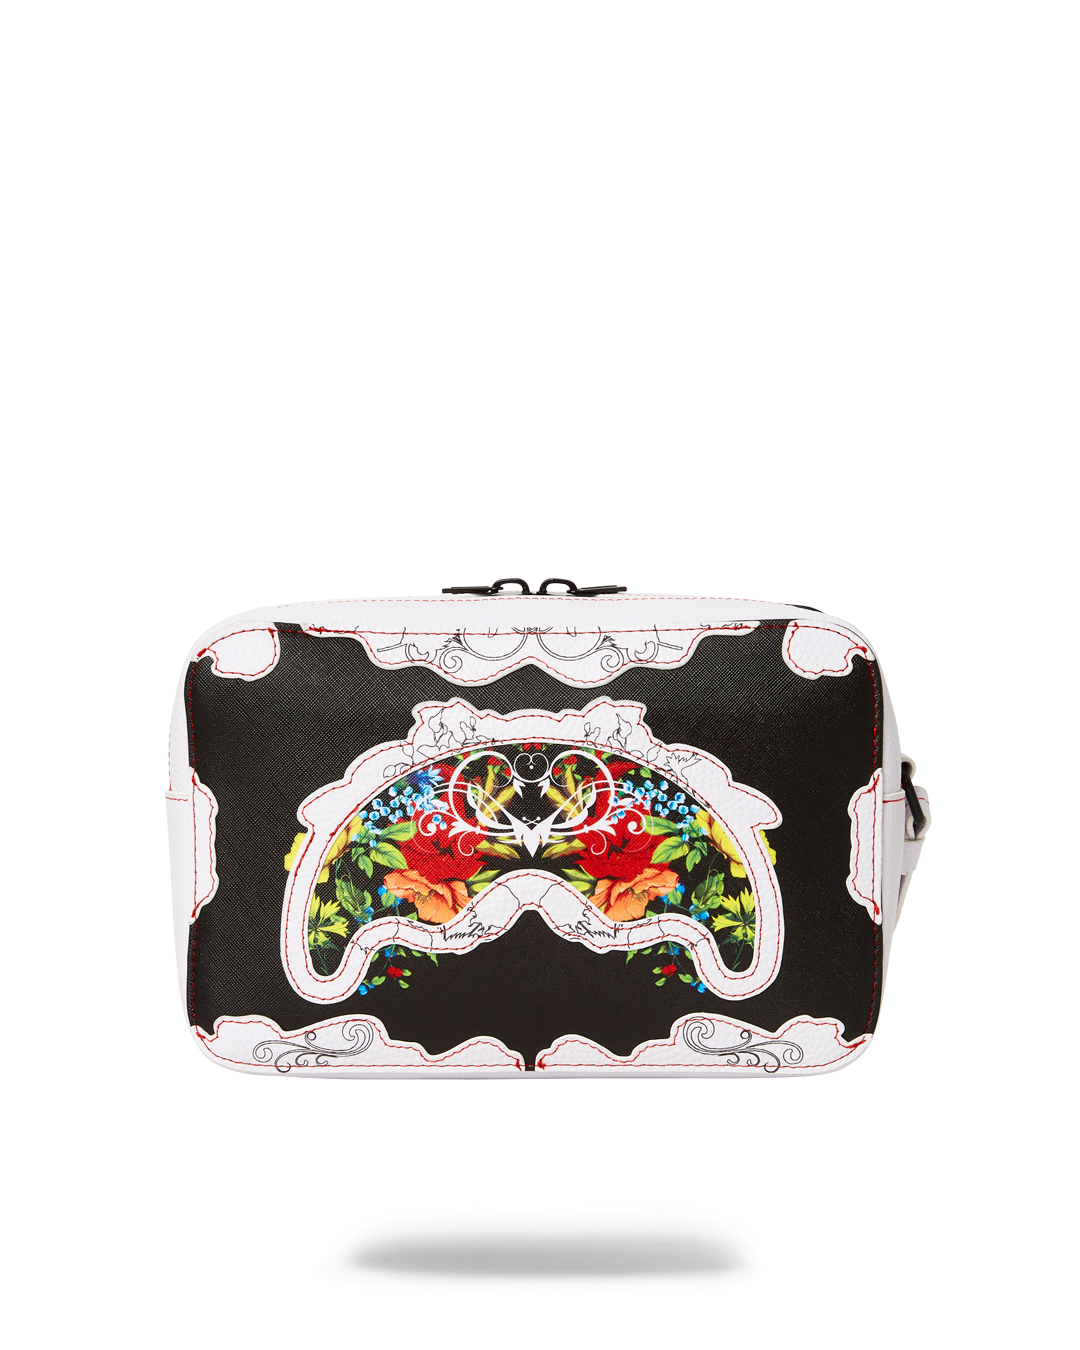 SPRAYGROUND® TOILETRY THE FLORAL CUT TOILETRY BAG